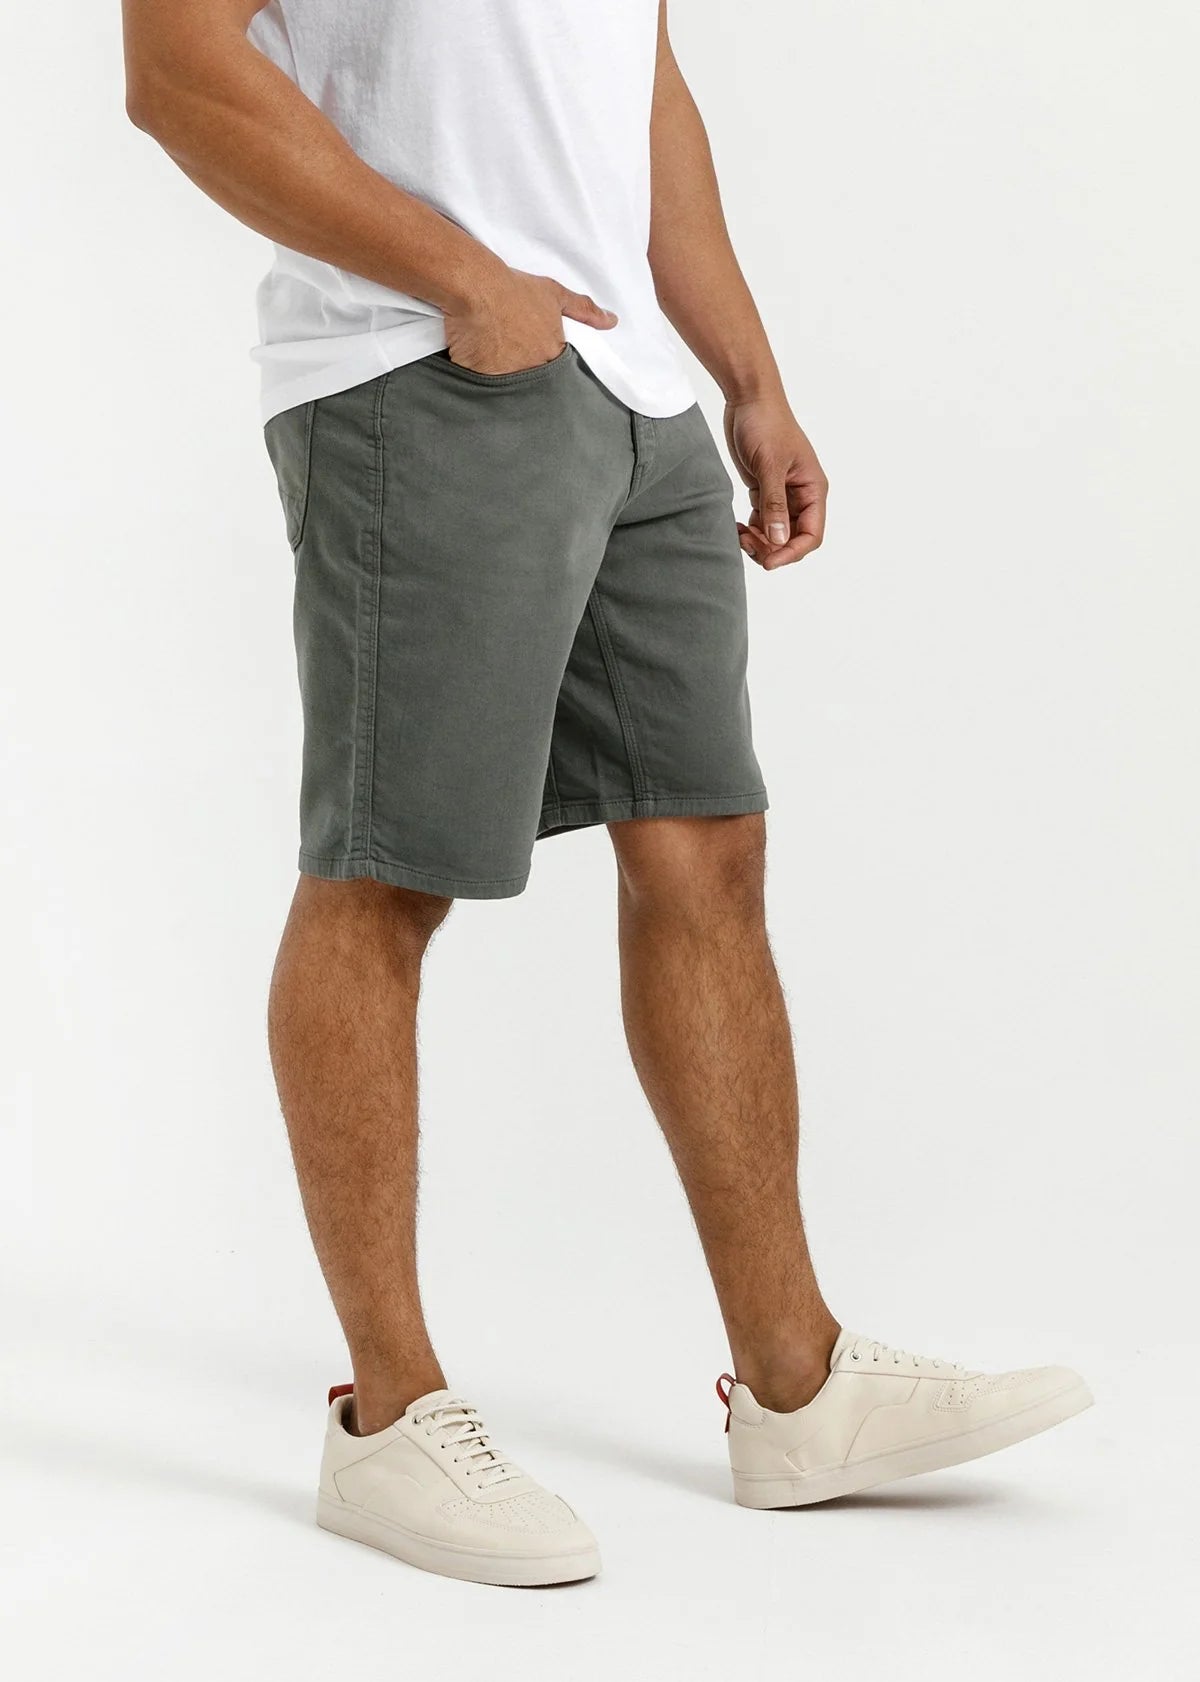 'Du/er No Sweat Shorts Relaxed' in 'Gull' colour